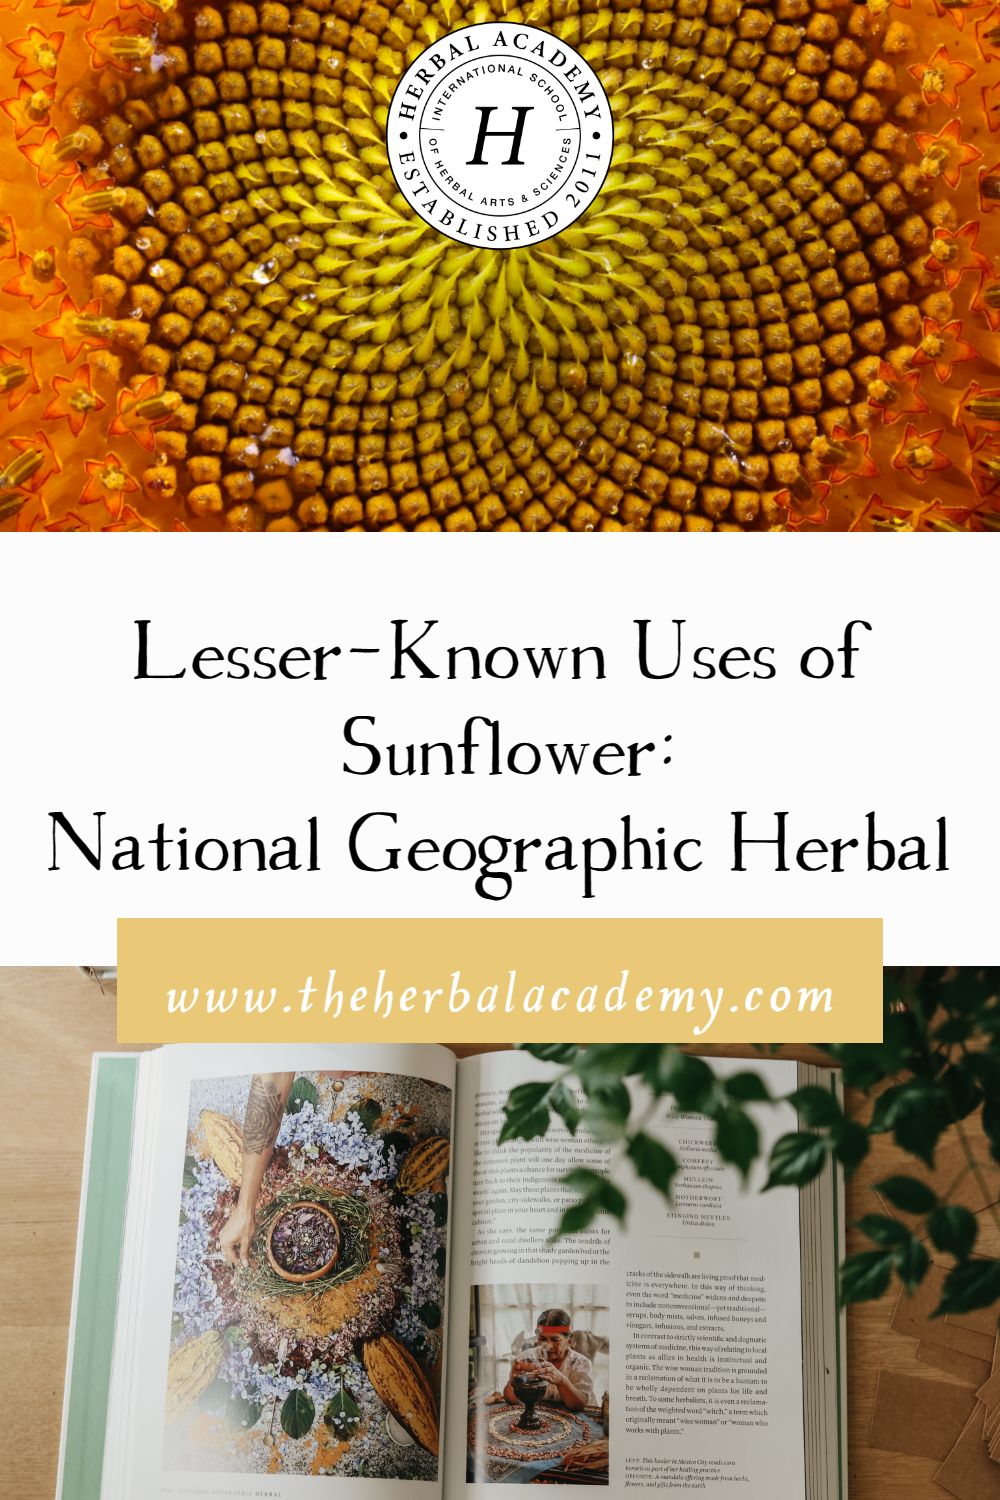 Lesser-Known Uses of Sunflower: National Geographic Herbal | Herbal Academy | Learn the lesser-known uses of sunflower taken from Mimi Hernandez's book, National Geographic Herbal.